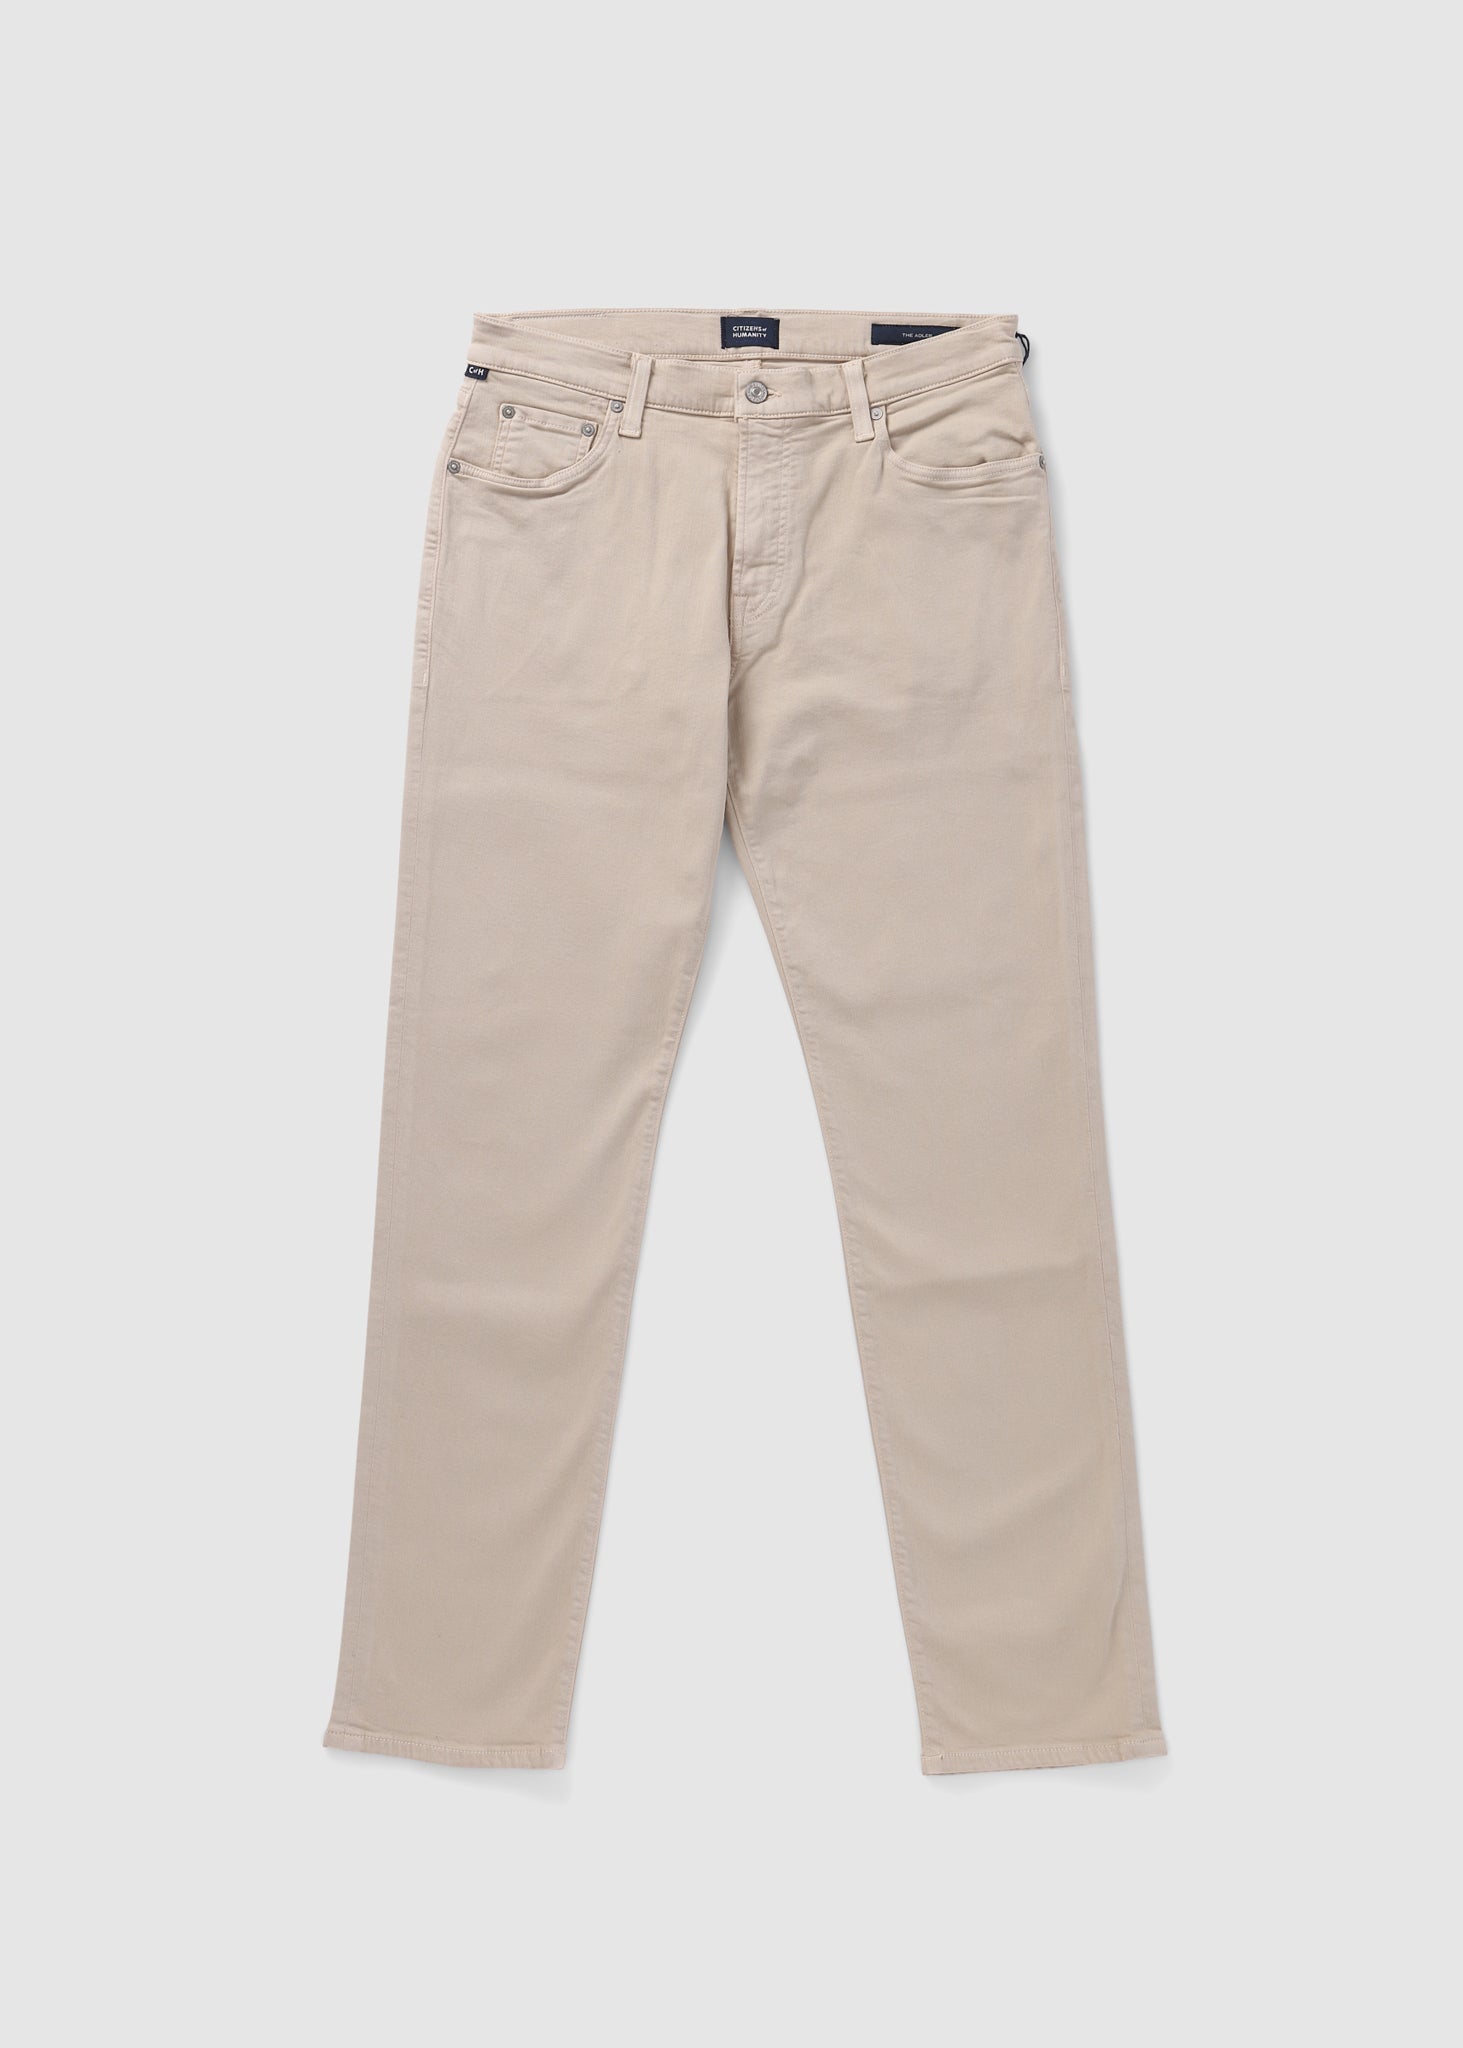 Citizens Of Humanity Mens Adler In Stretch Twill Jeans